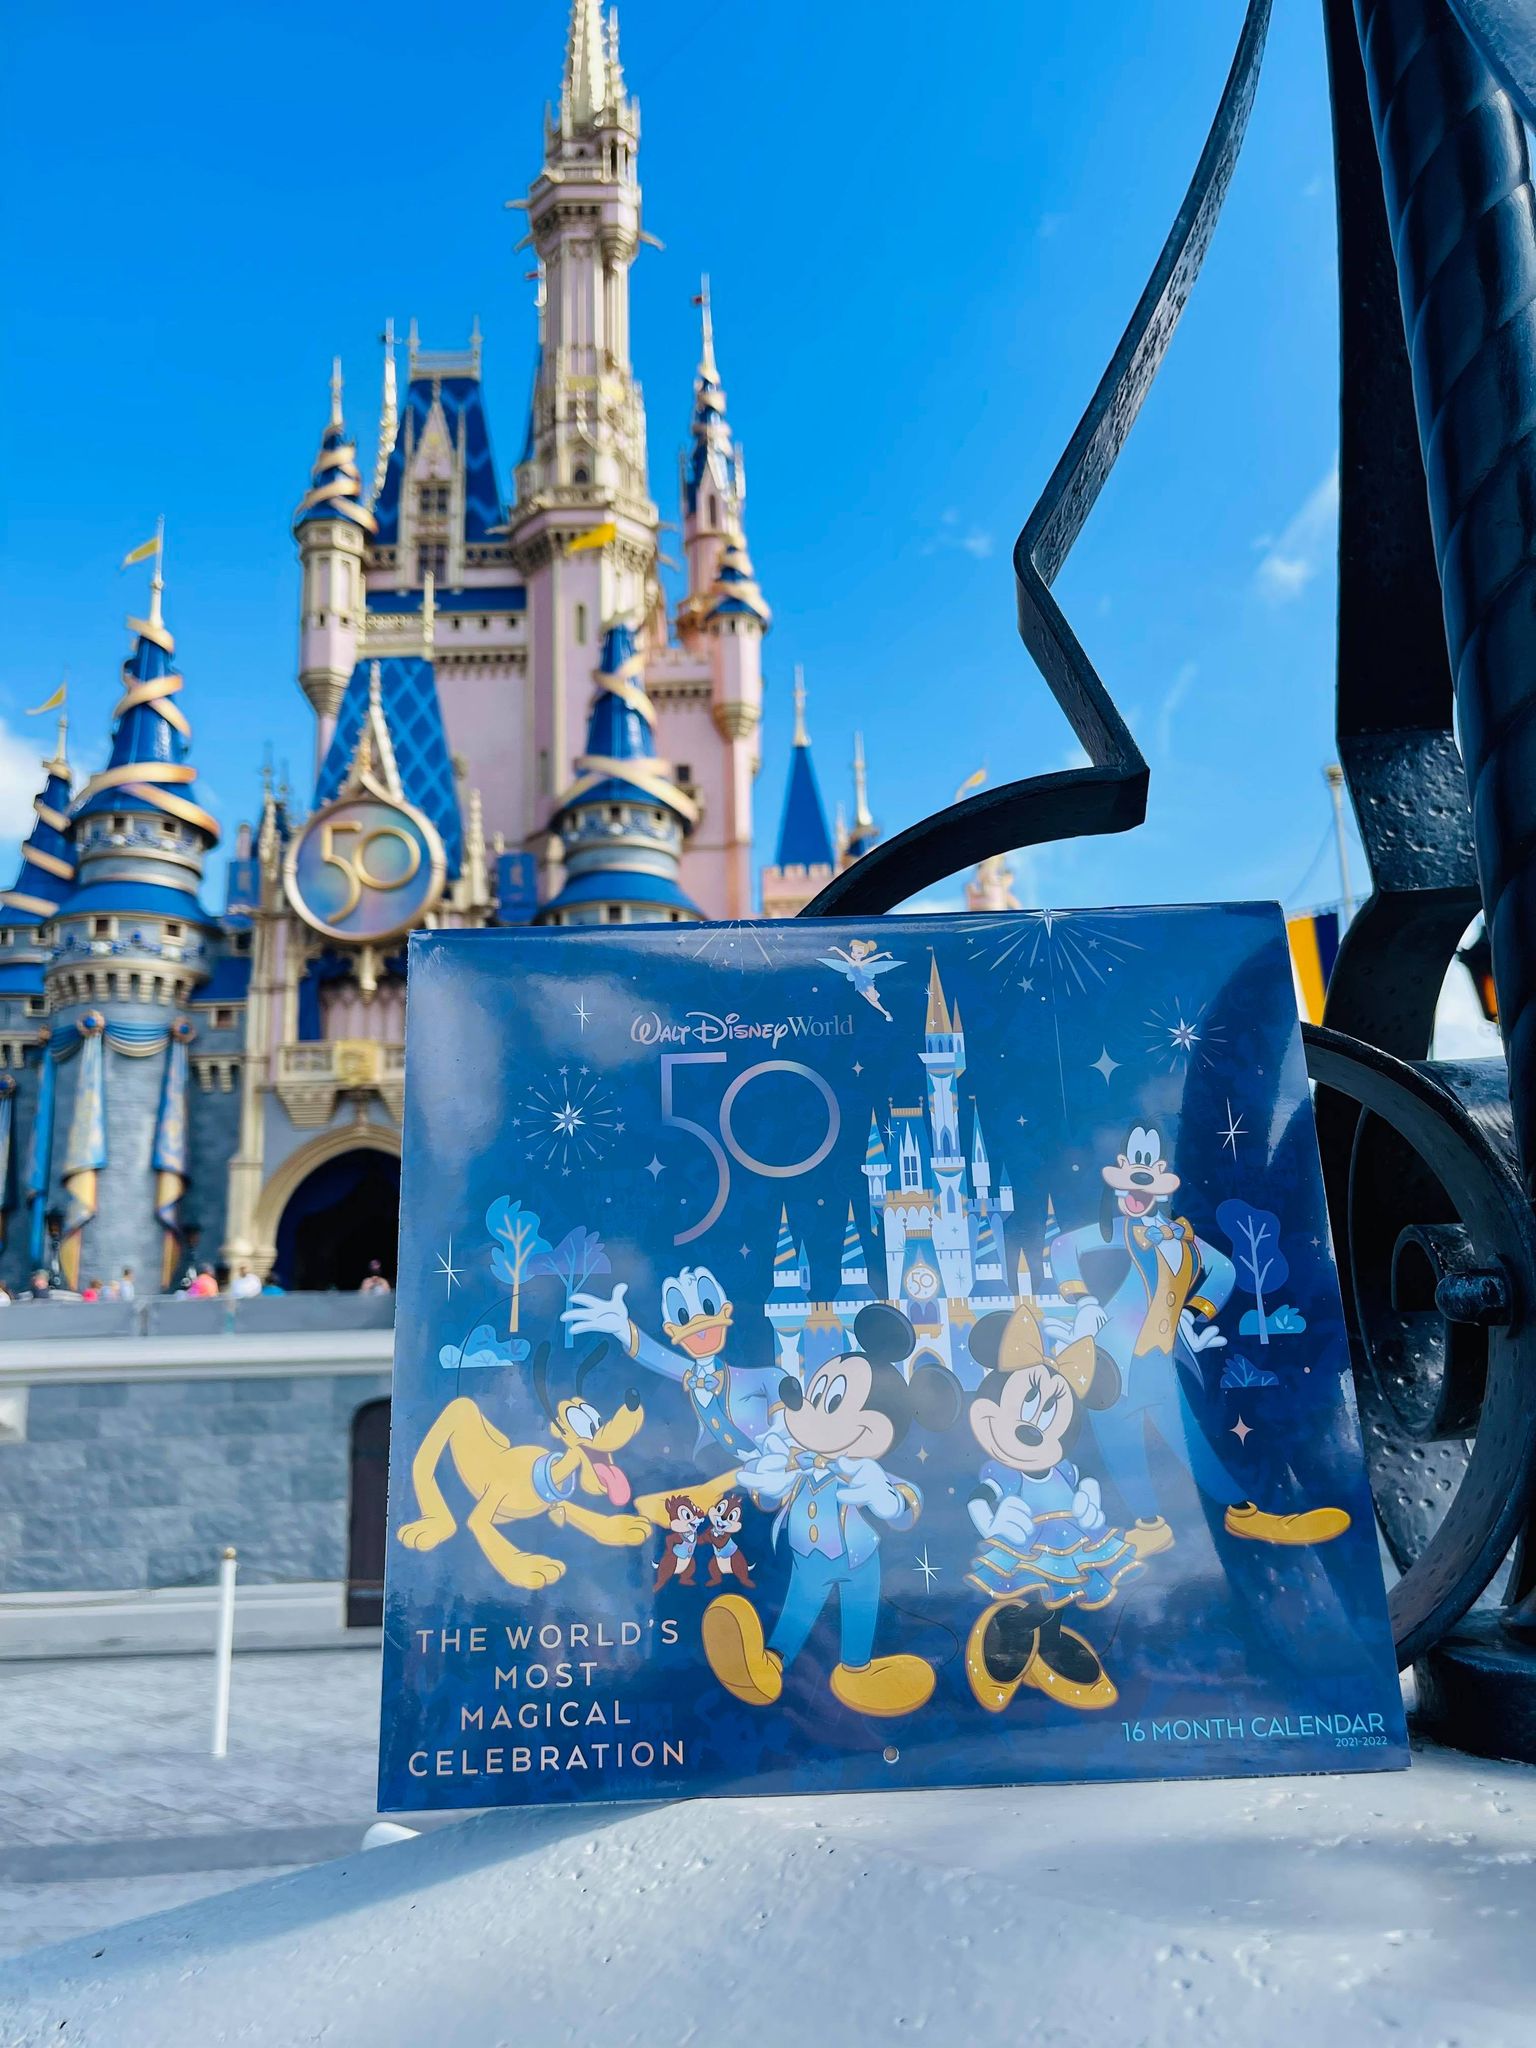 Countdown The Days To Disney World's 50th Anniversary With This NEW